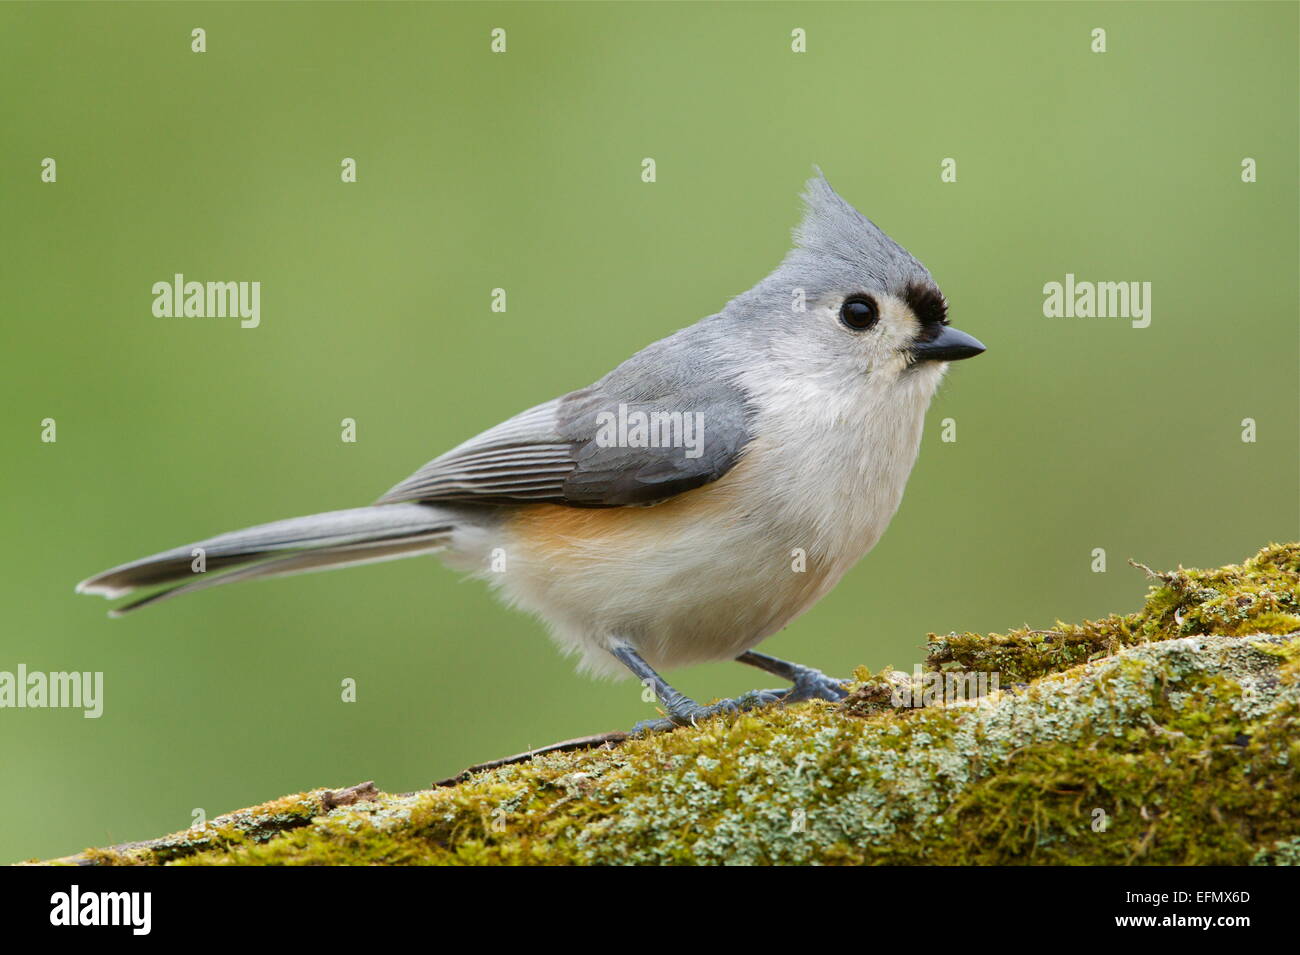 Tufted Titmouse, Baeolophus bicolor, perched on a mossy log with a natural green woodland background. Stock Photo